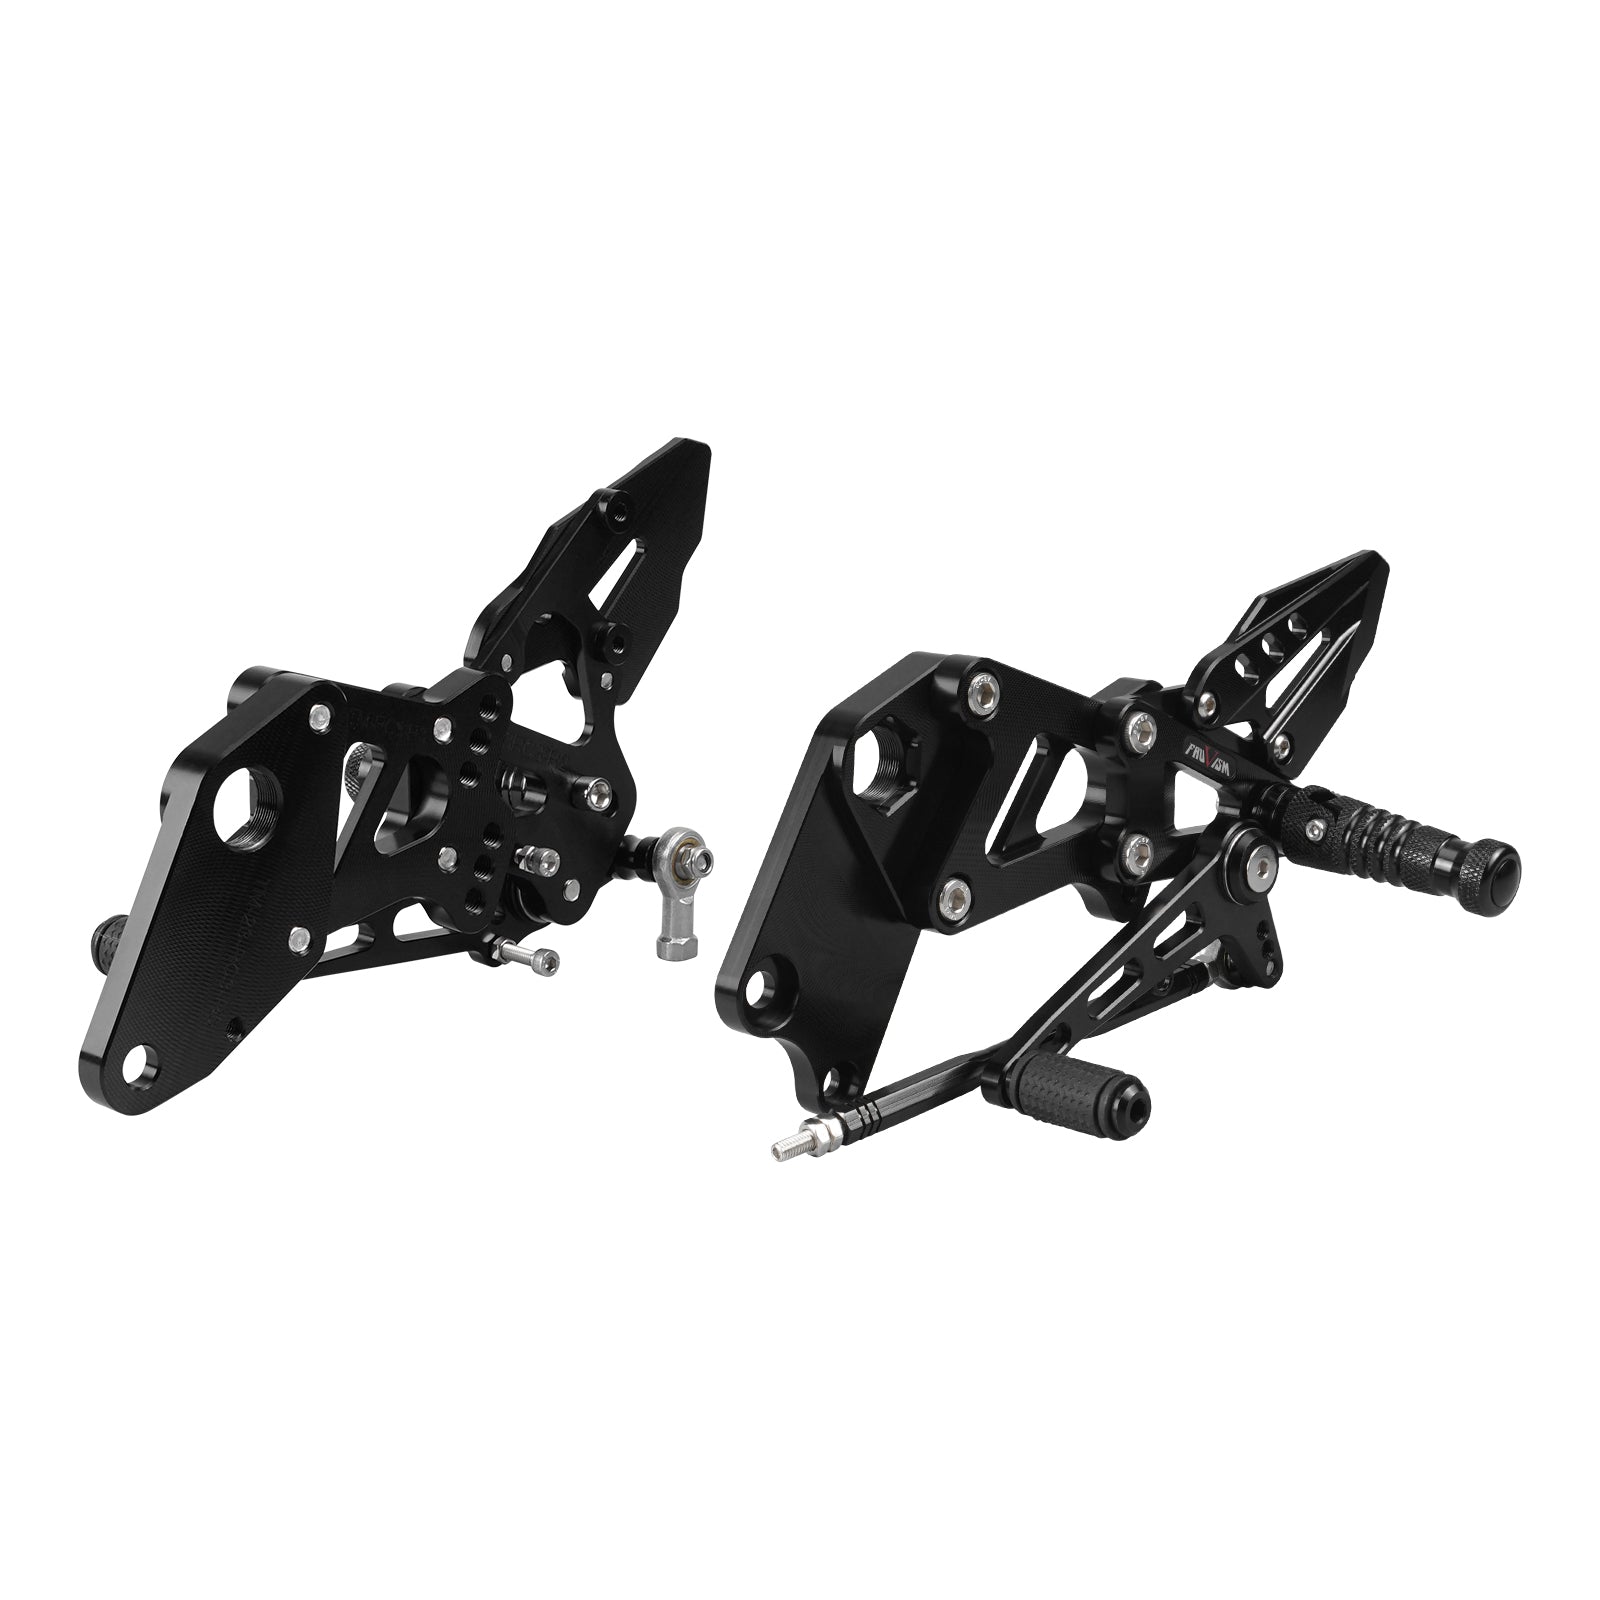 Rearset Racing Footrest Kit with Brake Shift Levers & Rod For KTM RC 390 2022-2023